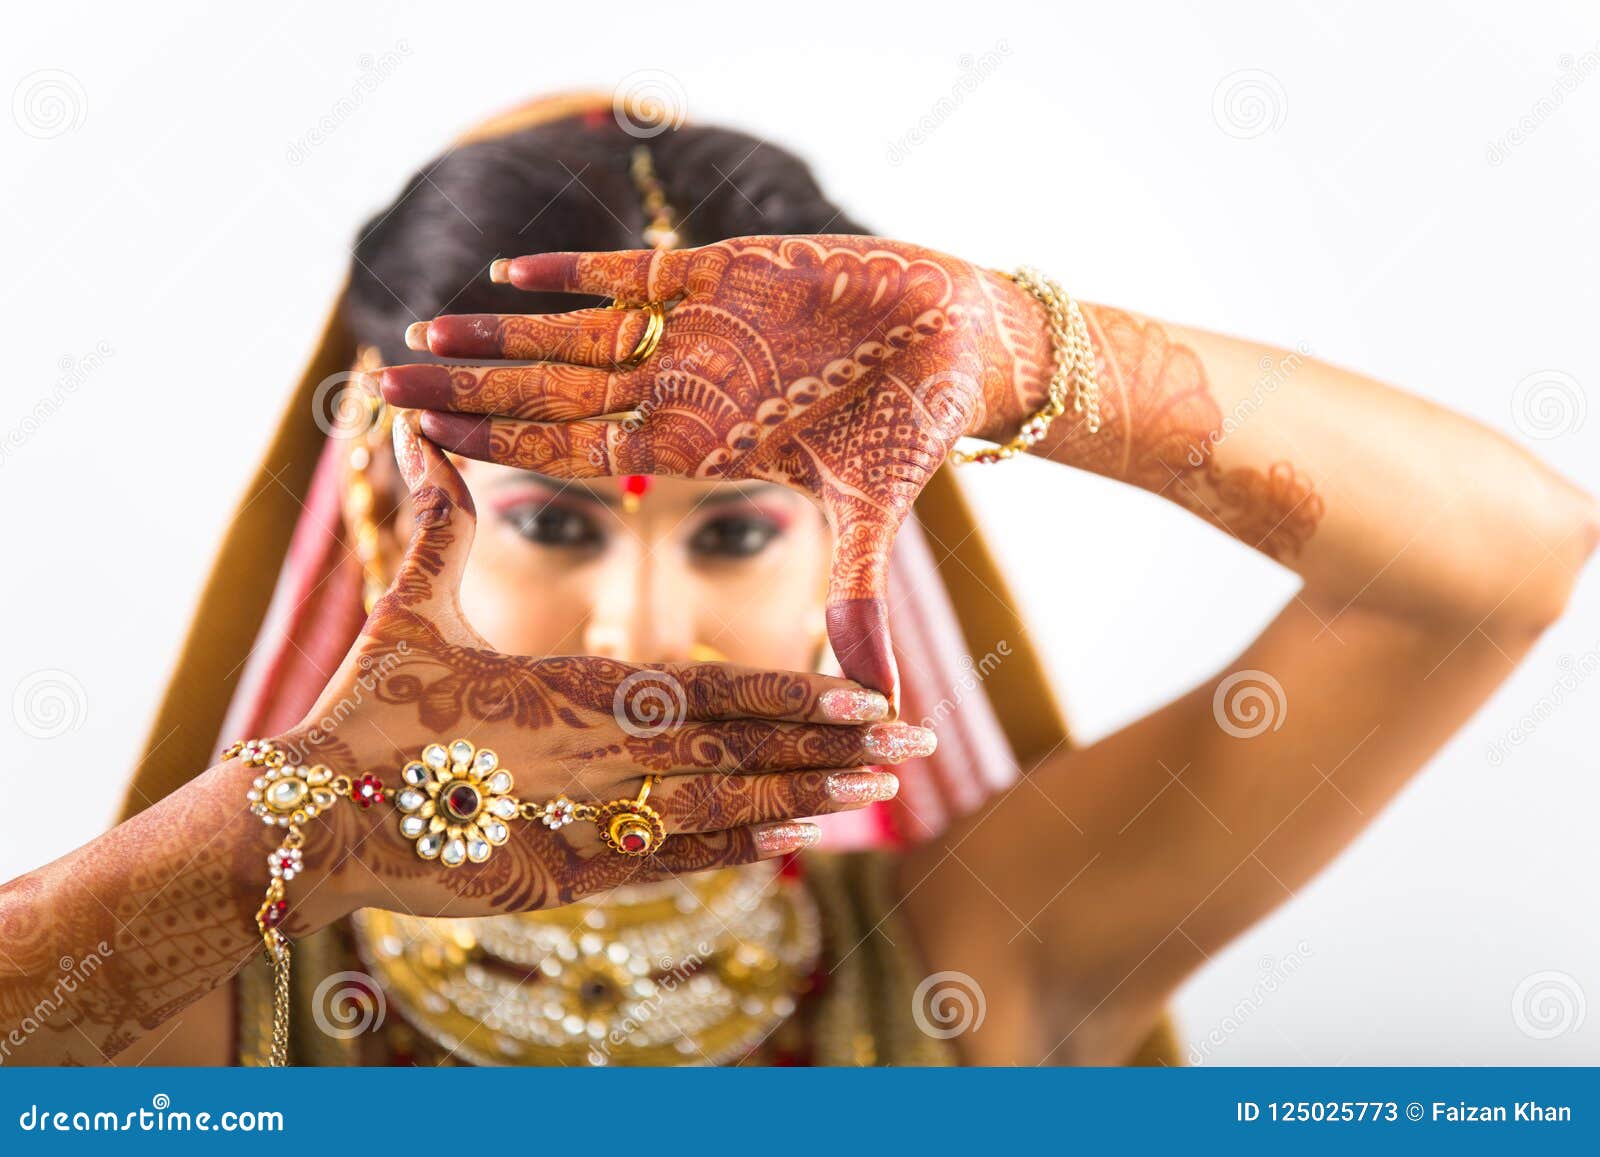 70 Dulhan pose ideas | bridal photography poses, indian wedding photography  couples, indian wedding photography poses